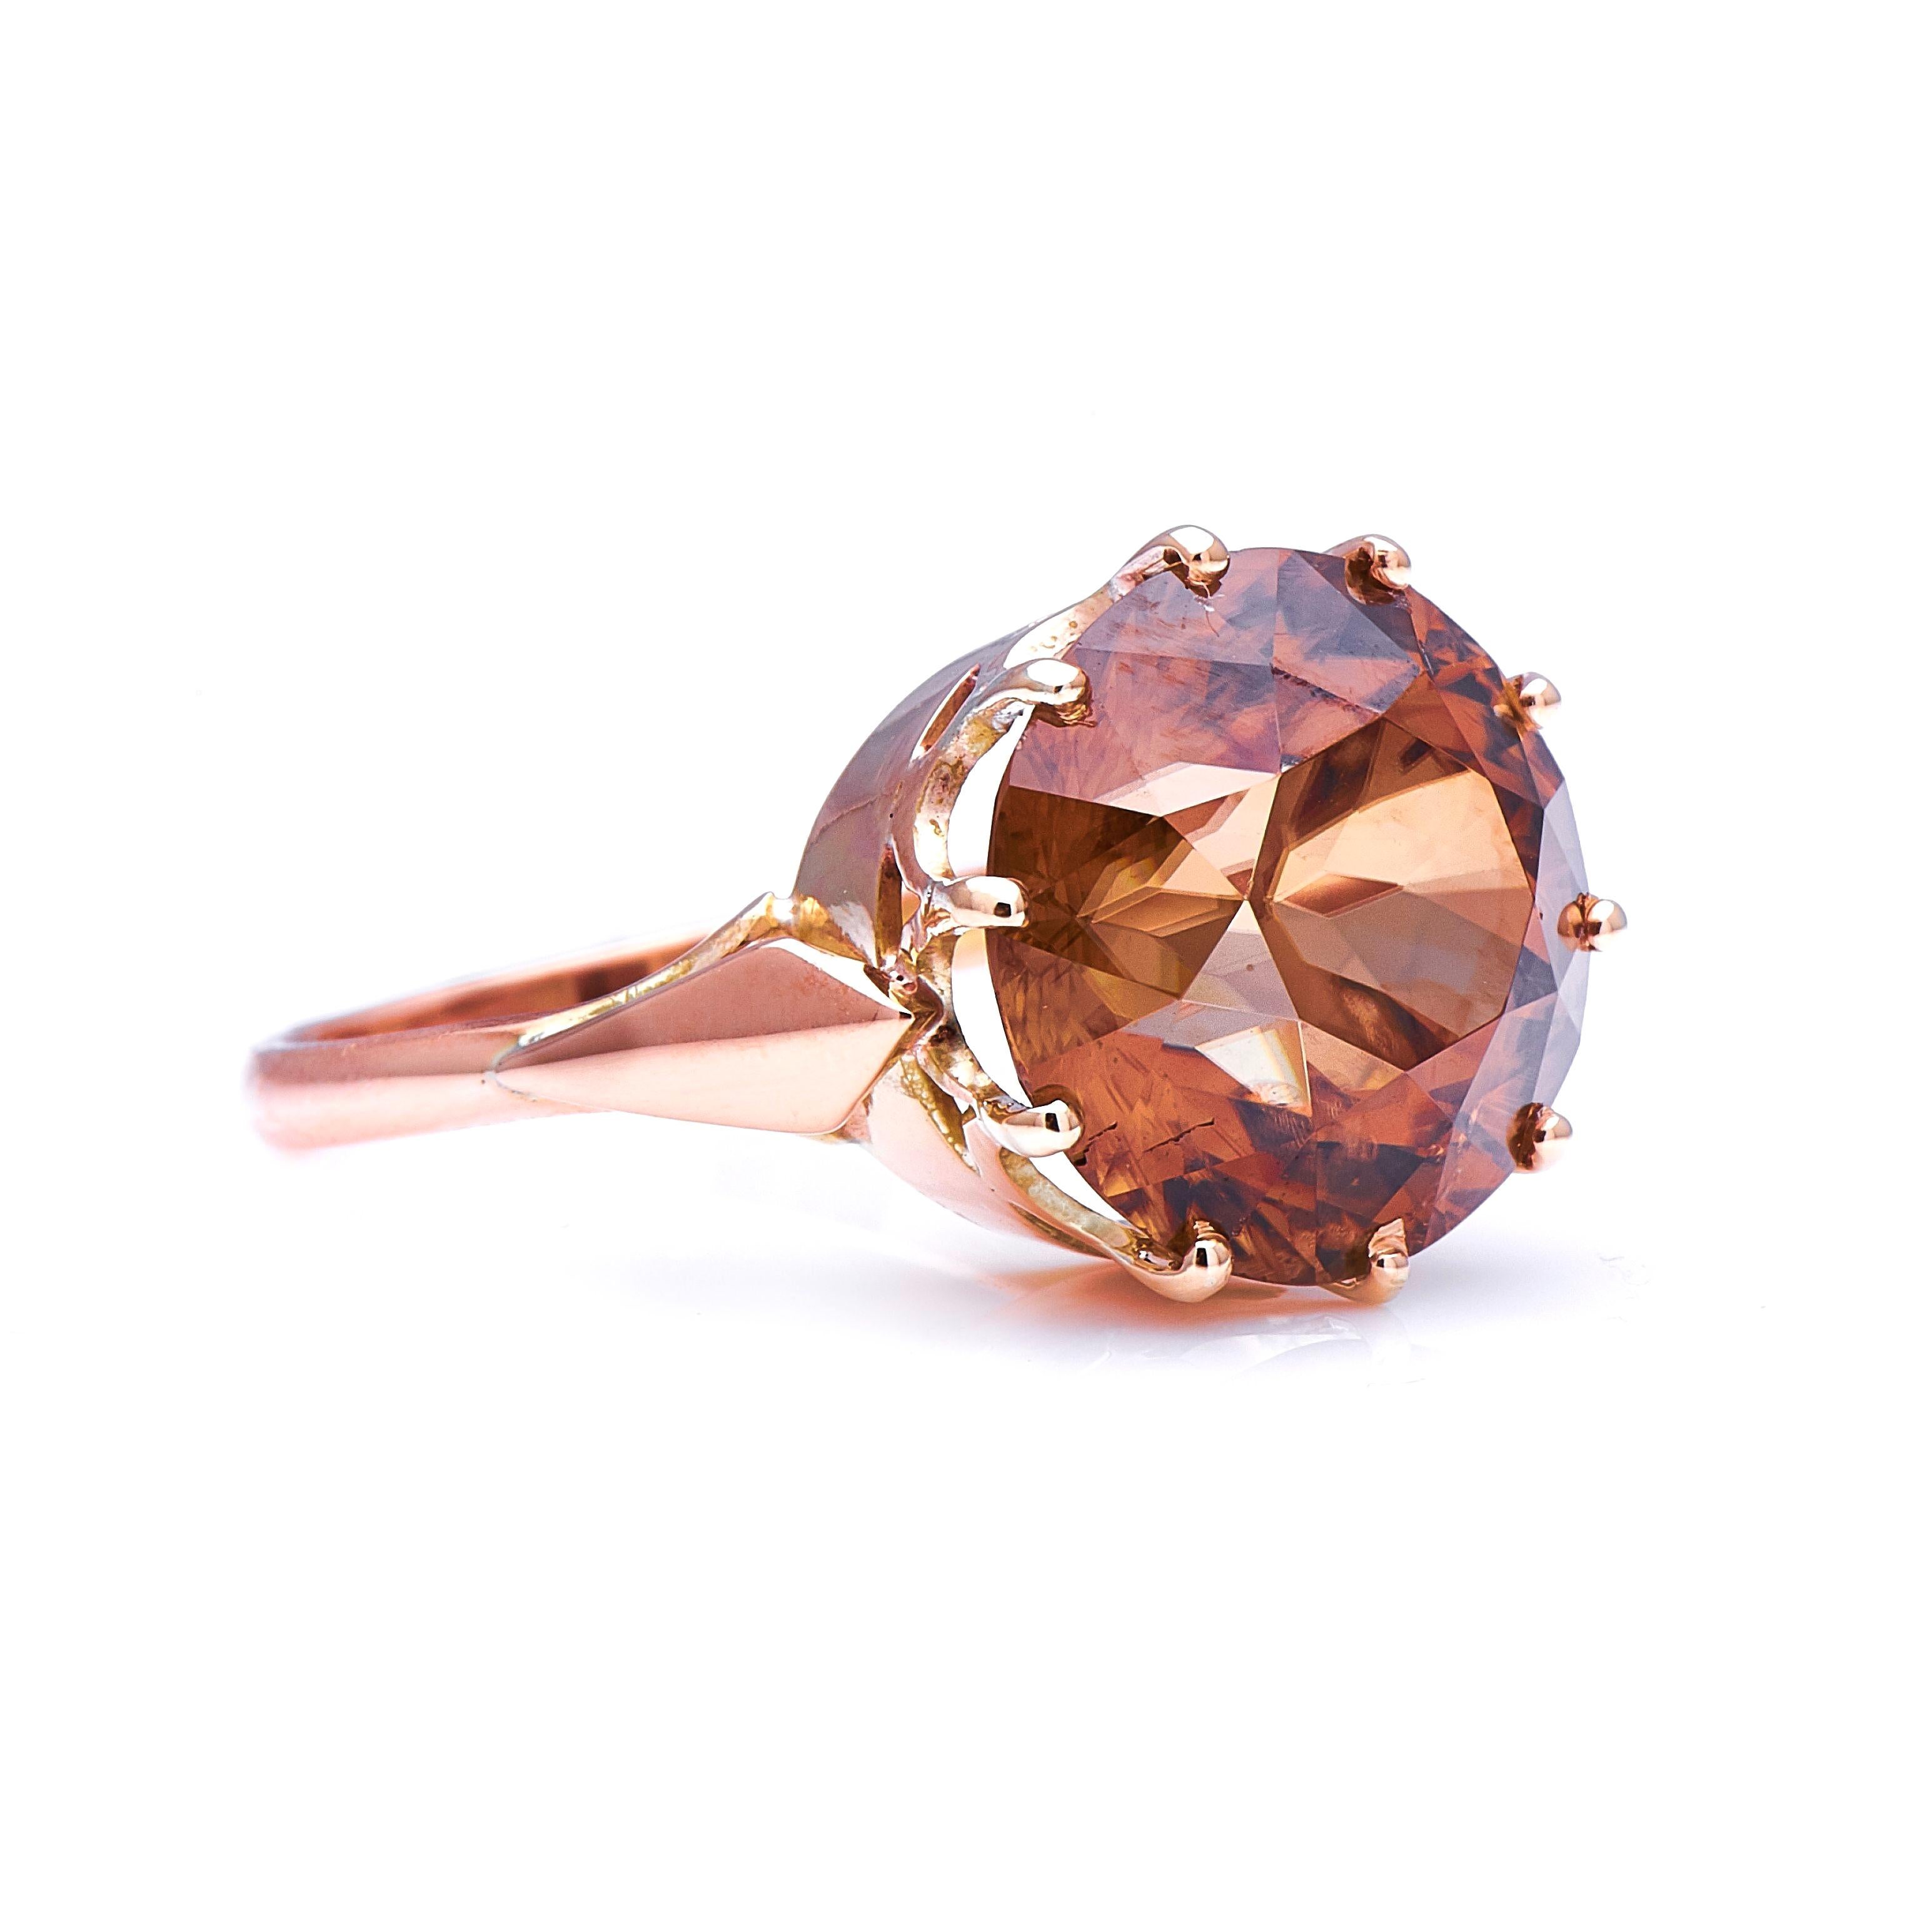 Zircon ring, circa 1920. Zircons, not to be confused with the diamond simulant cubic zirconia, are natural stones with a venerable history, prized for their bright lustre, their high dispersion and their range of beautiful body colours. This light